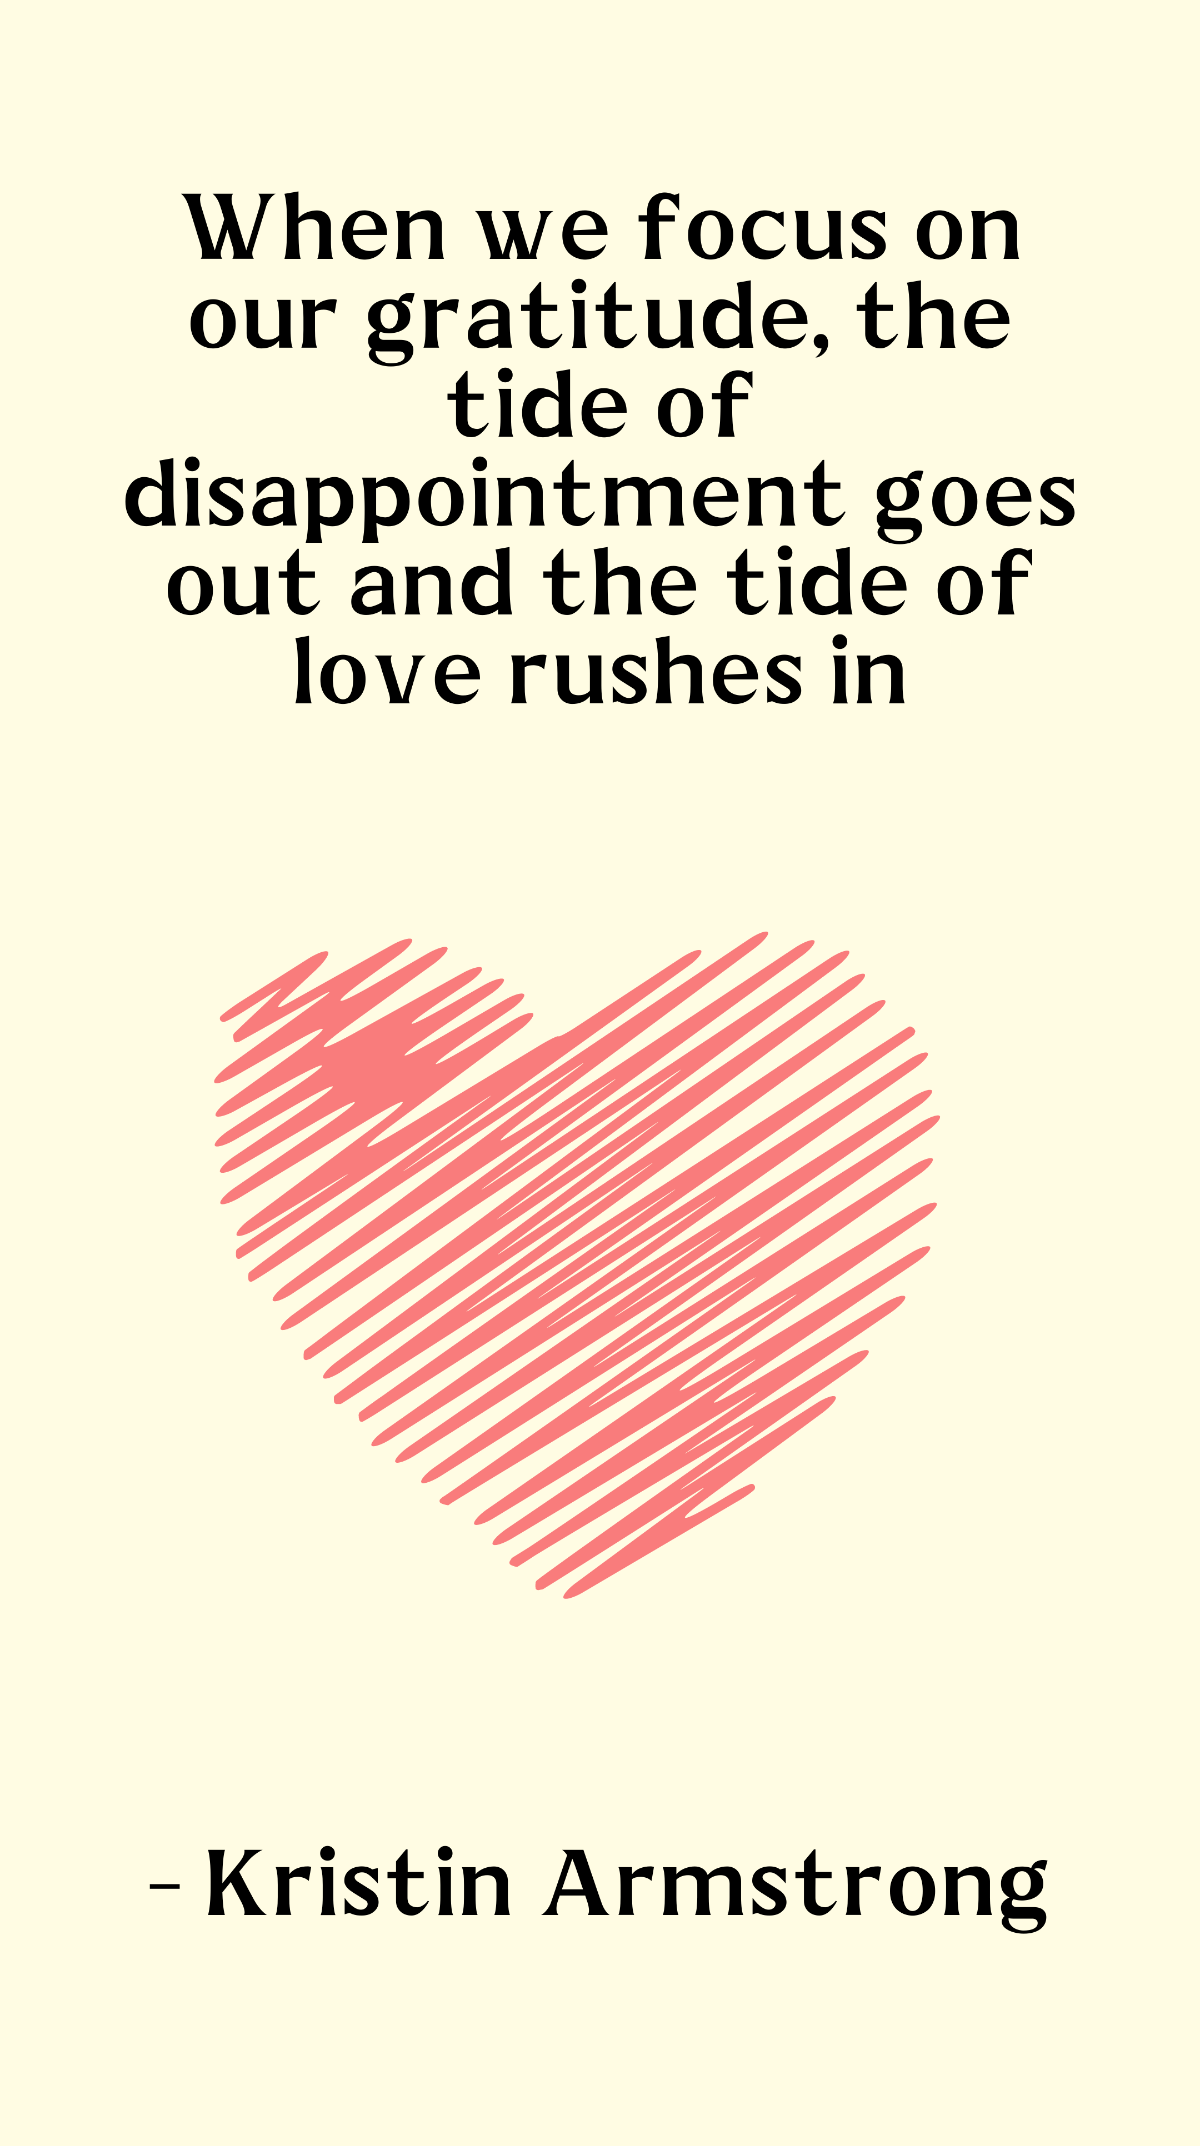 Kristin Armstrong - When we focus on our gratitude, the tide of disappointment goes out and the tide of love rushes in